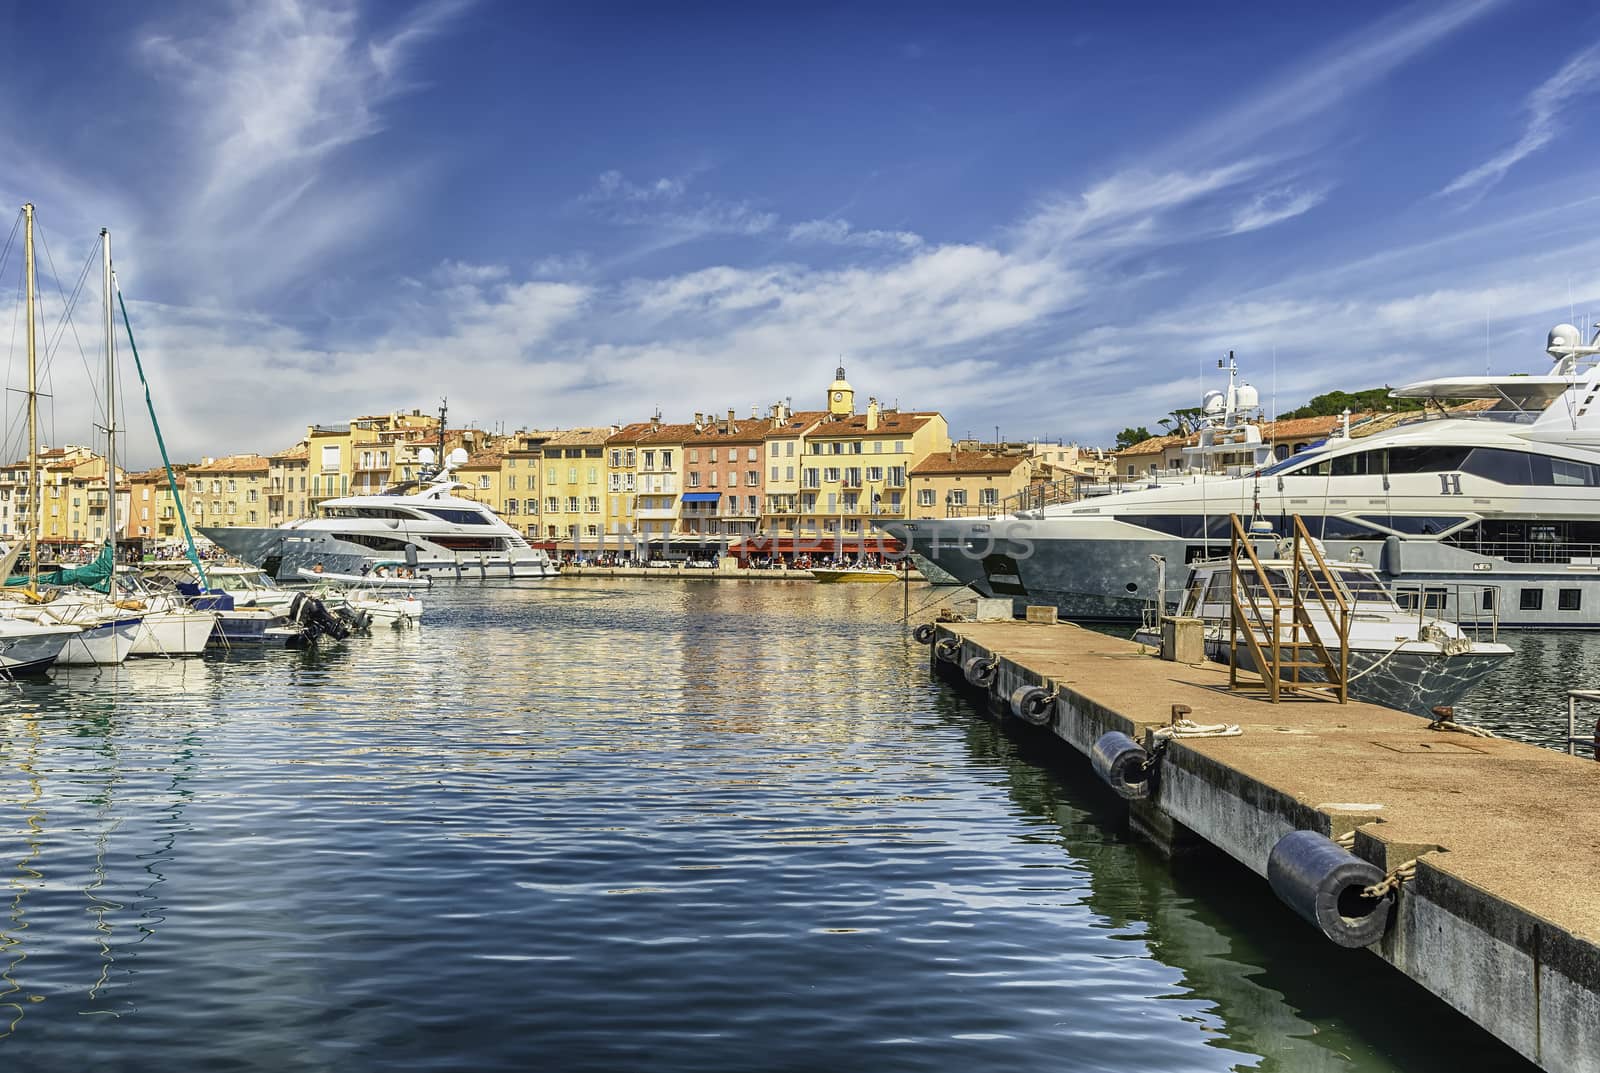 View of the old harbor with luxury yachts of Saint-Tropez, Cote d'Azur, France. The town is a worldwide famous resort for the European and American jet set and tourists